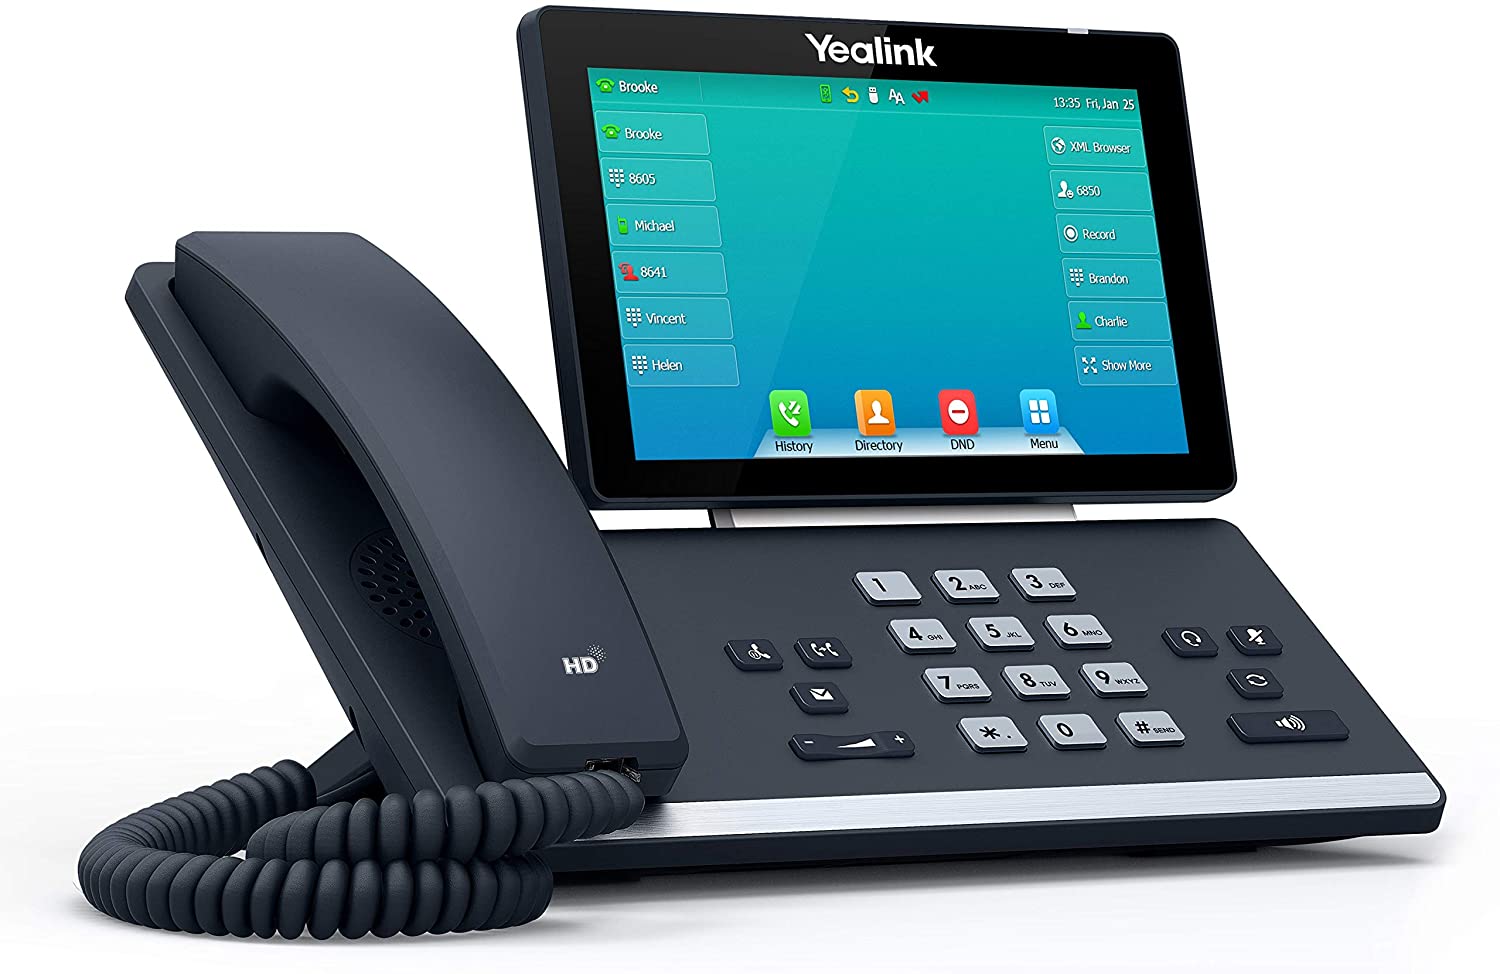 Yealink T57W VoIP Desk Phone with TouchScreen, WiFi, and Bluetooth